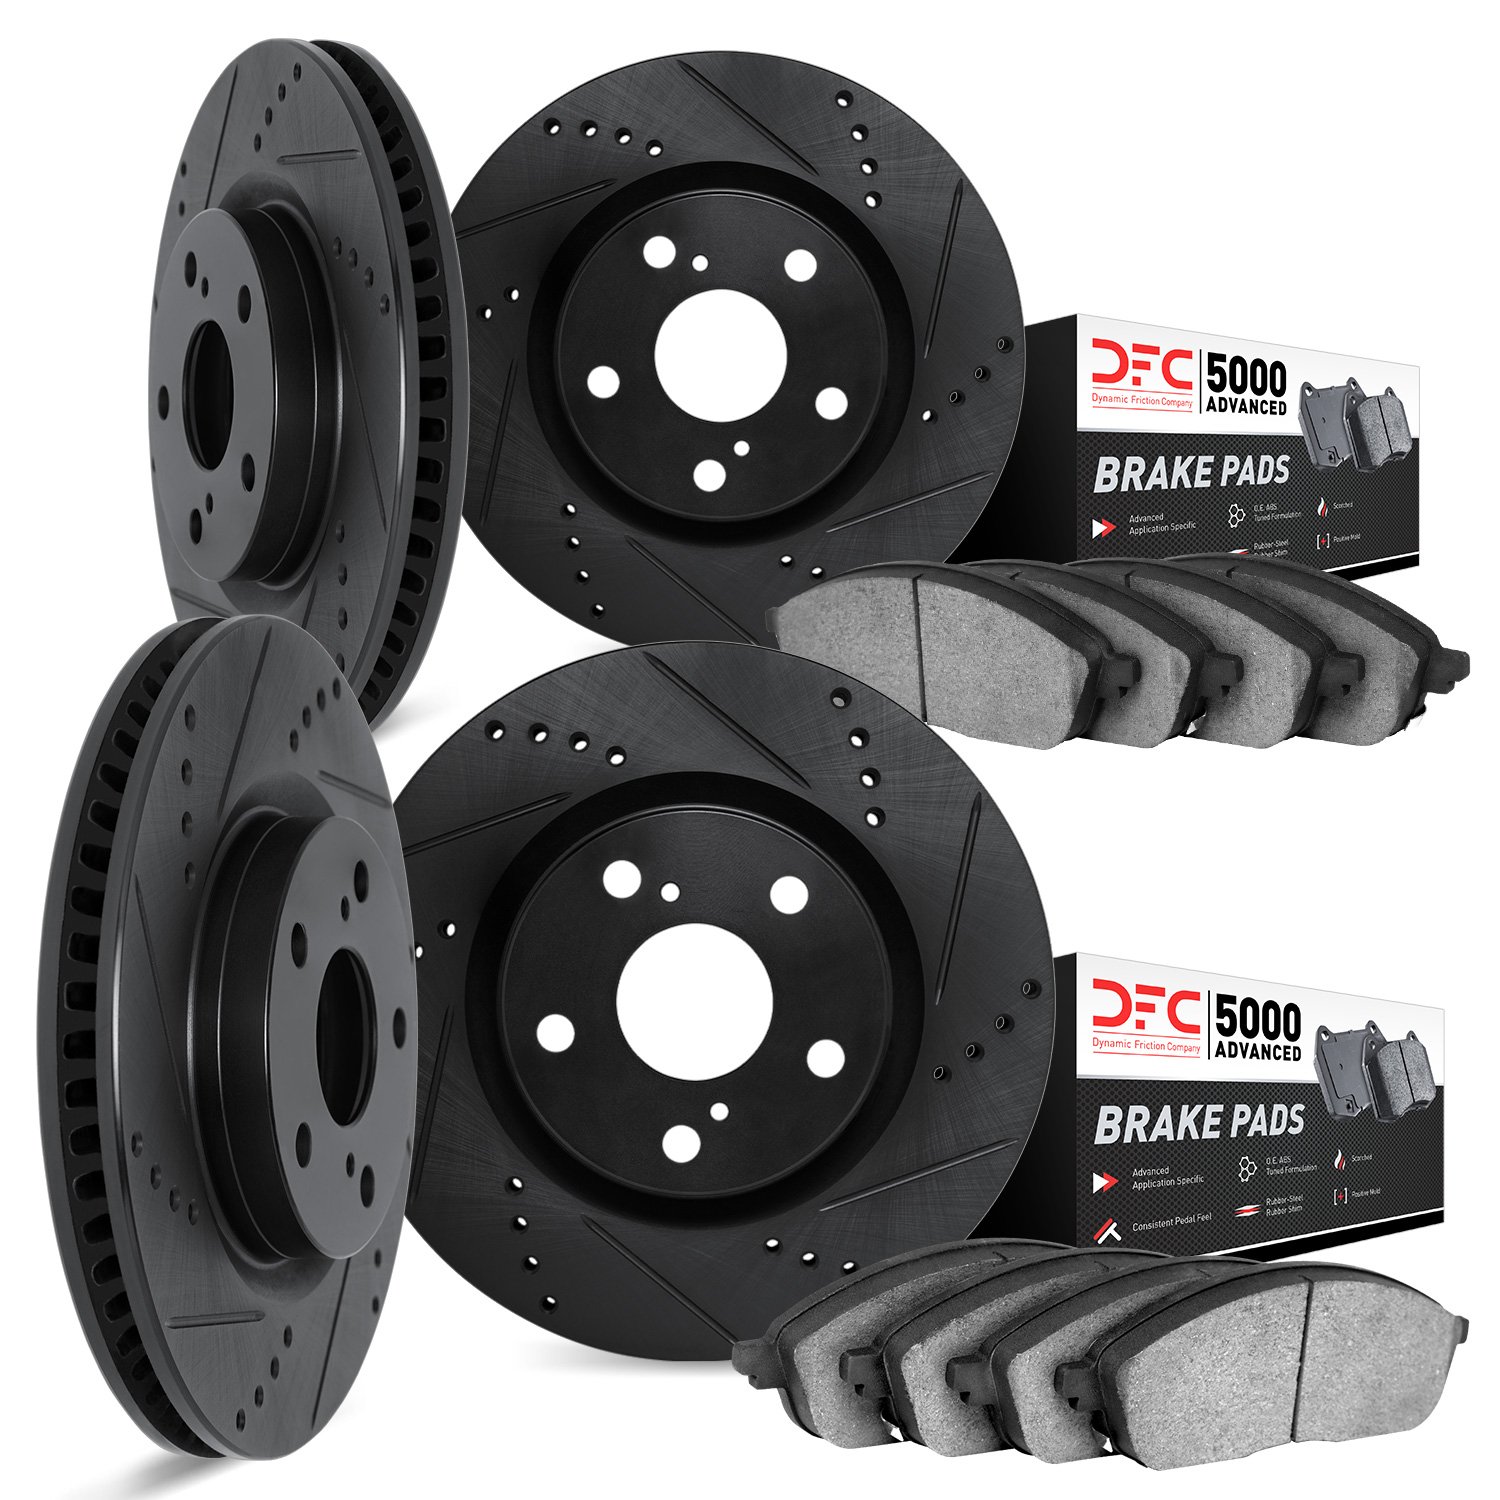 8504-47248 Drilled/Slotted Brake Rotors w/5000 Advanced Brake Pads Kit [Black], 1994-1996 GM, Position: Front and Rear